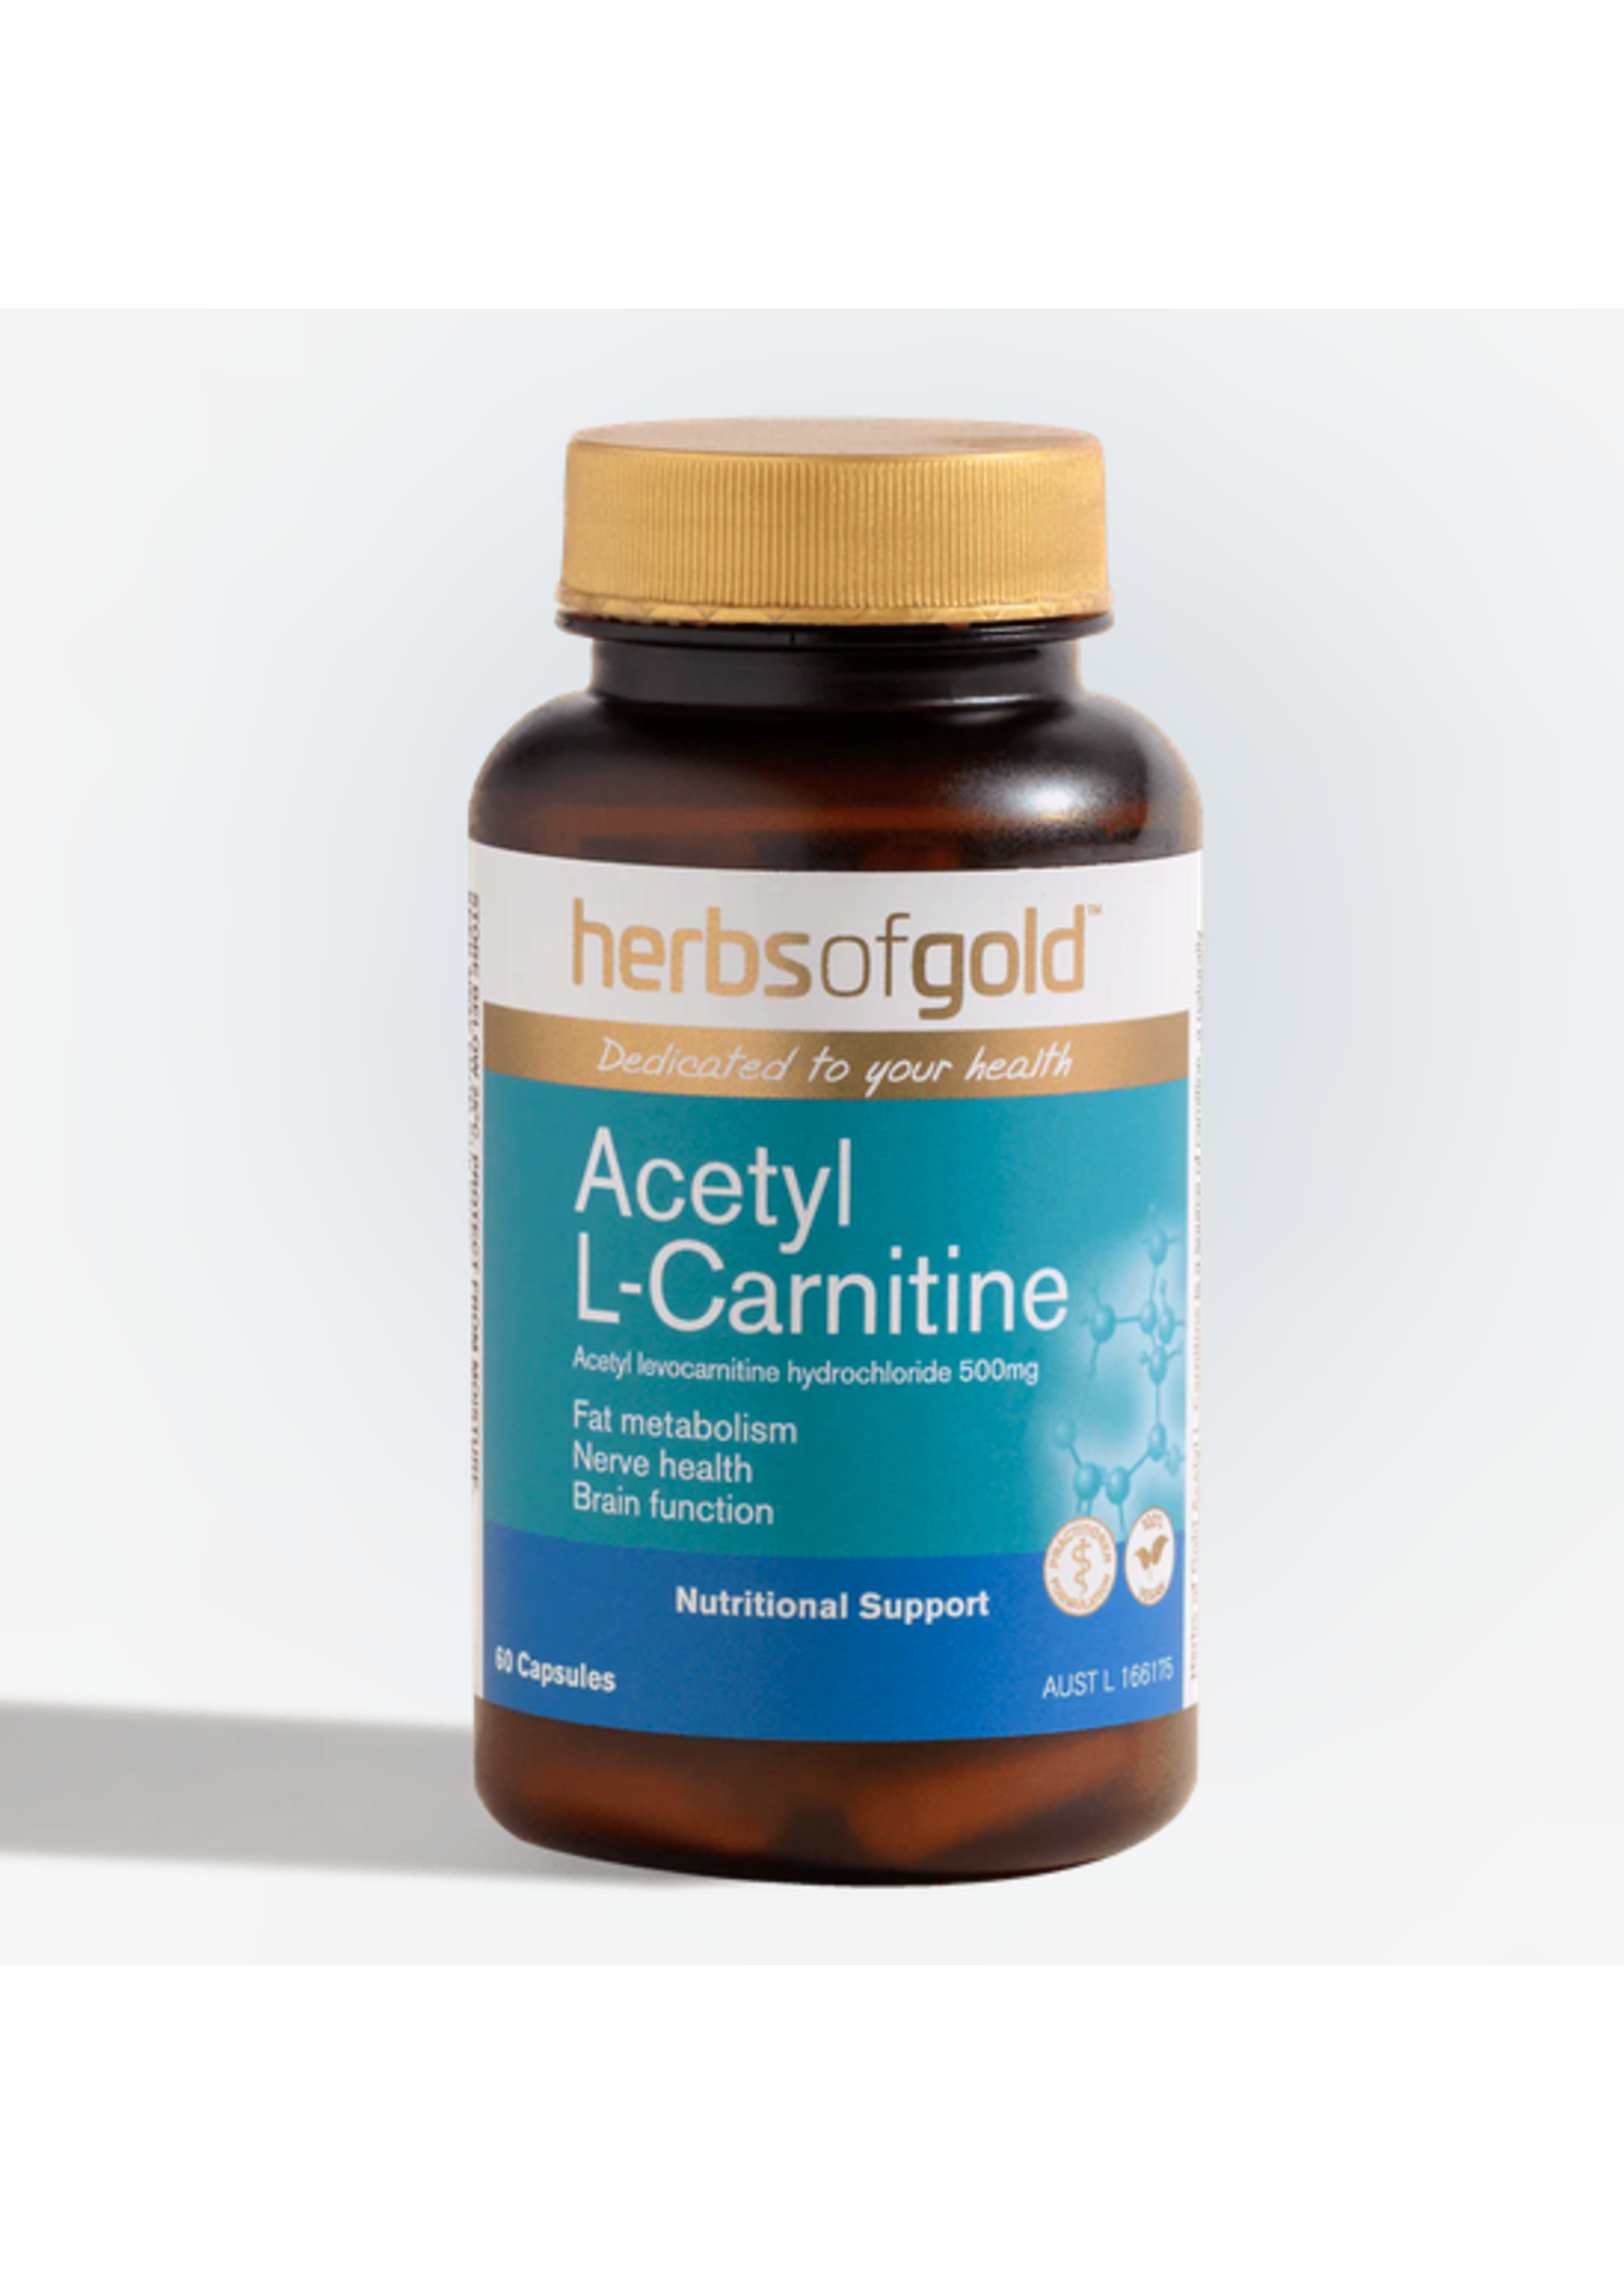 Herbs of Gold Herbs of Gold Acetyl L-Carnitine120caps (SPECIAL ORDER ONLY)